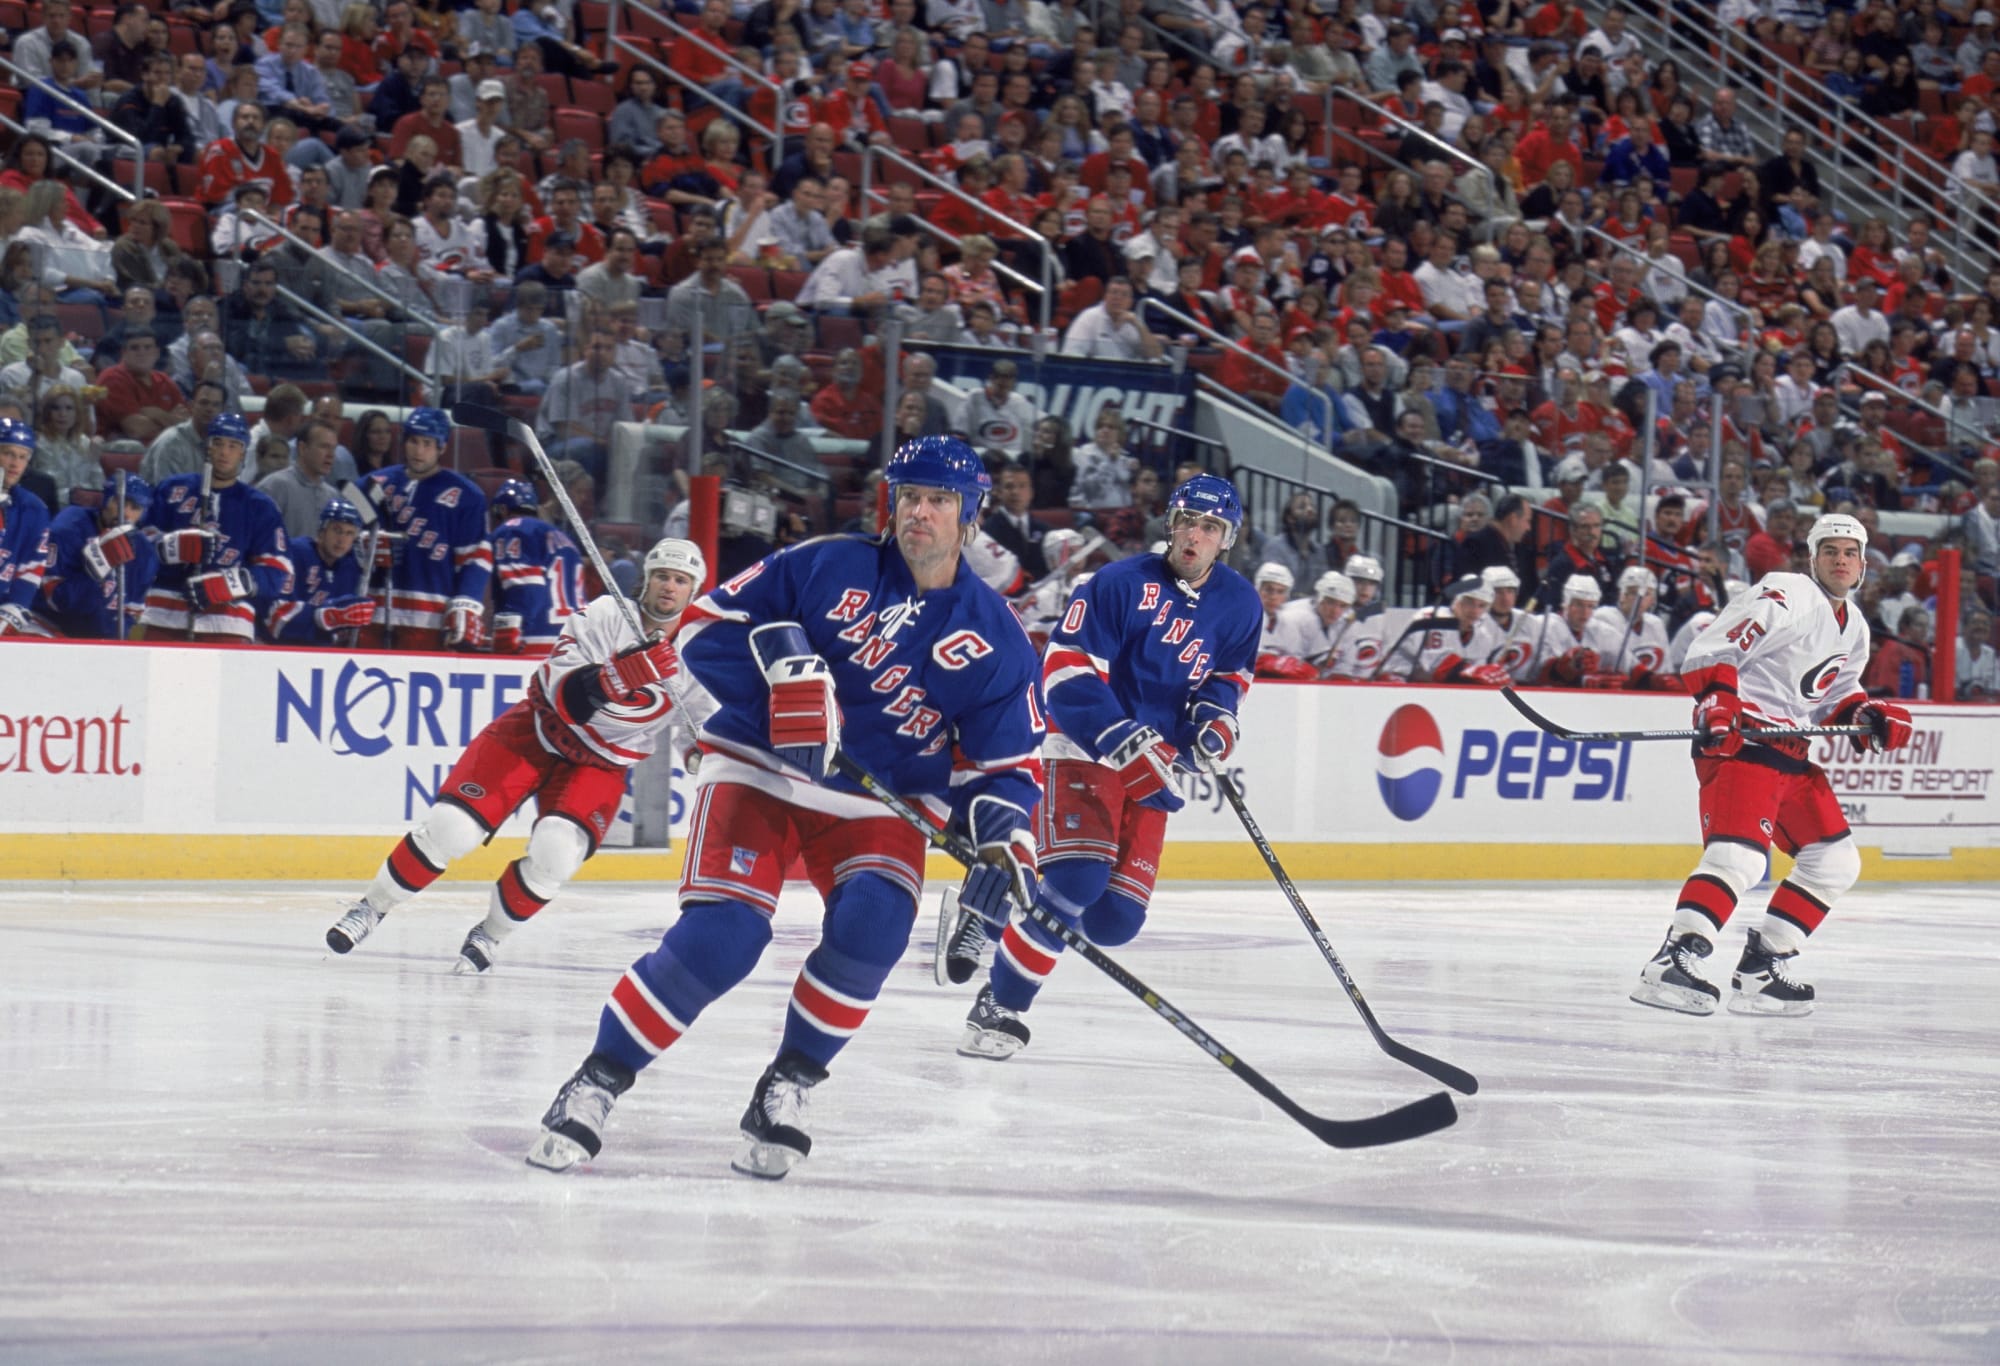 How Mark Messier's Game 6 guarantee win vs. Devils became a